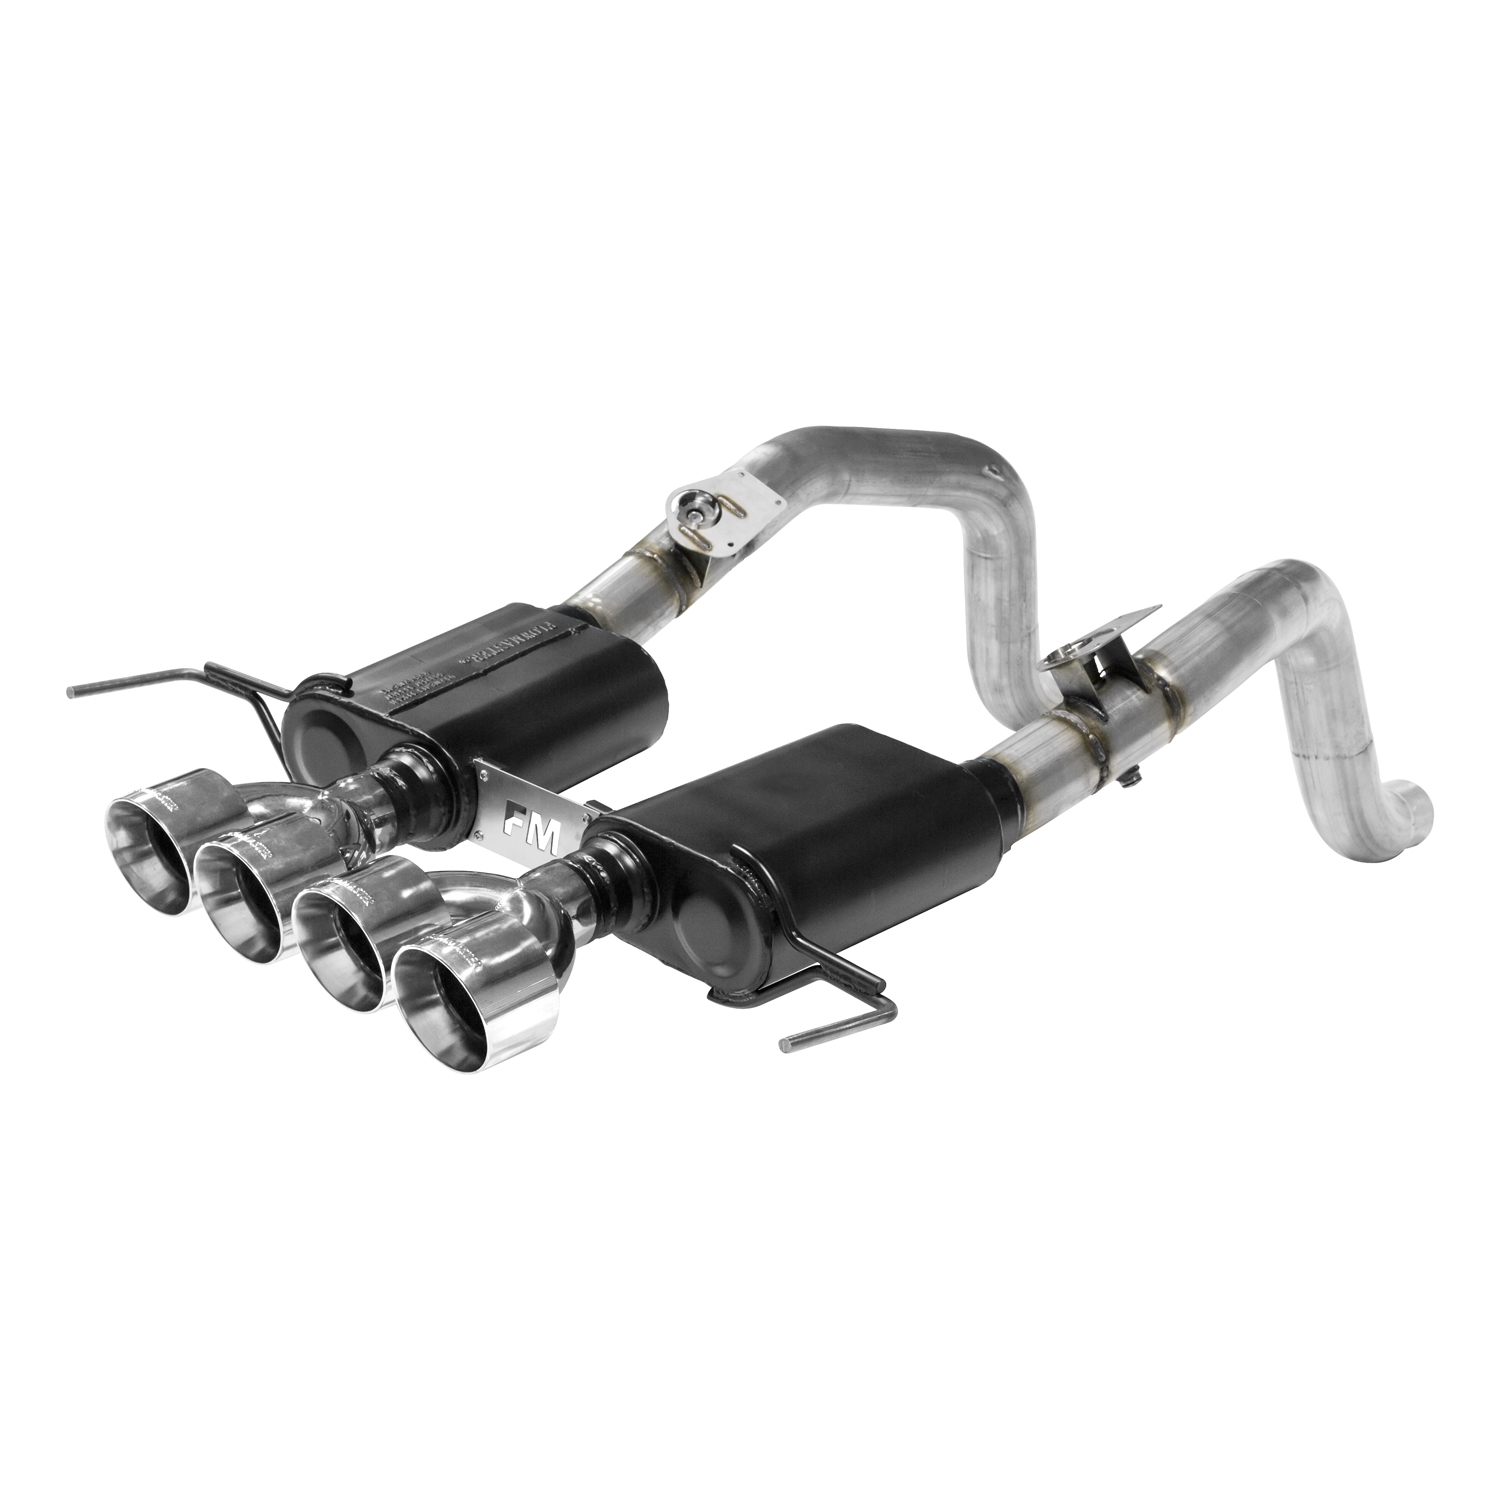 2014+ C7 Corvette Flowmaster Outlaw Axle-Back Exhaust System